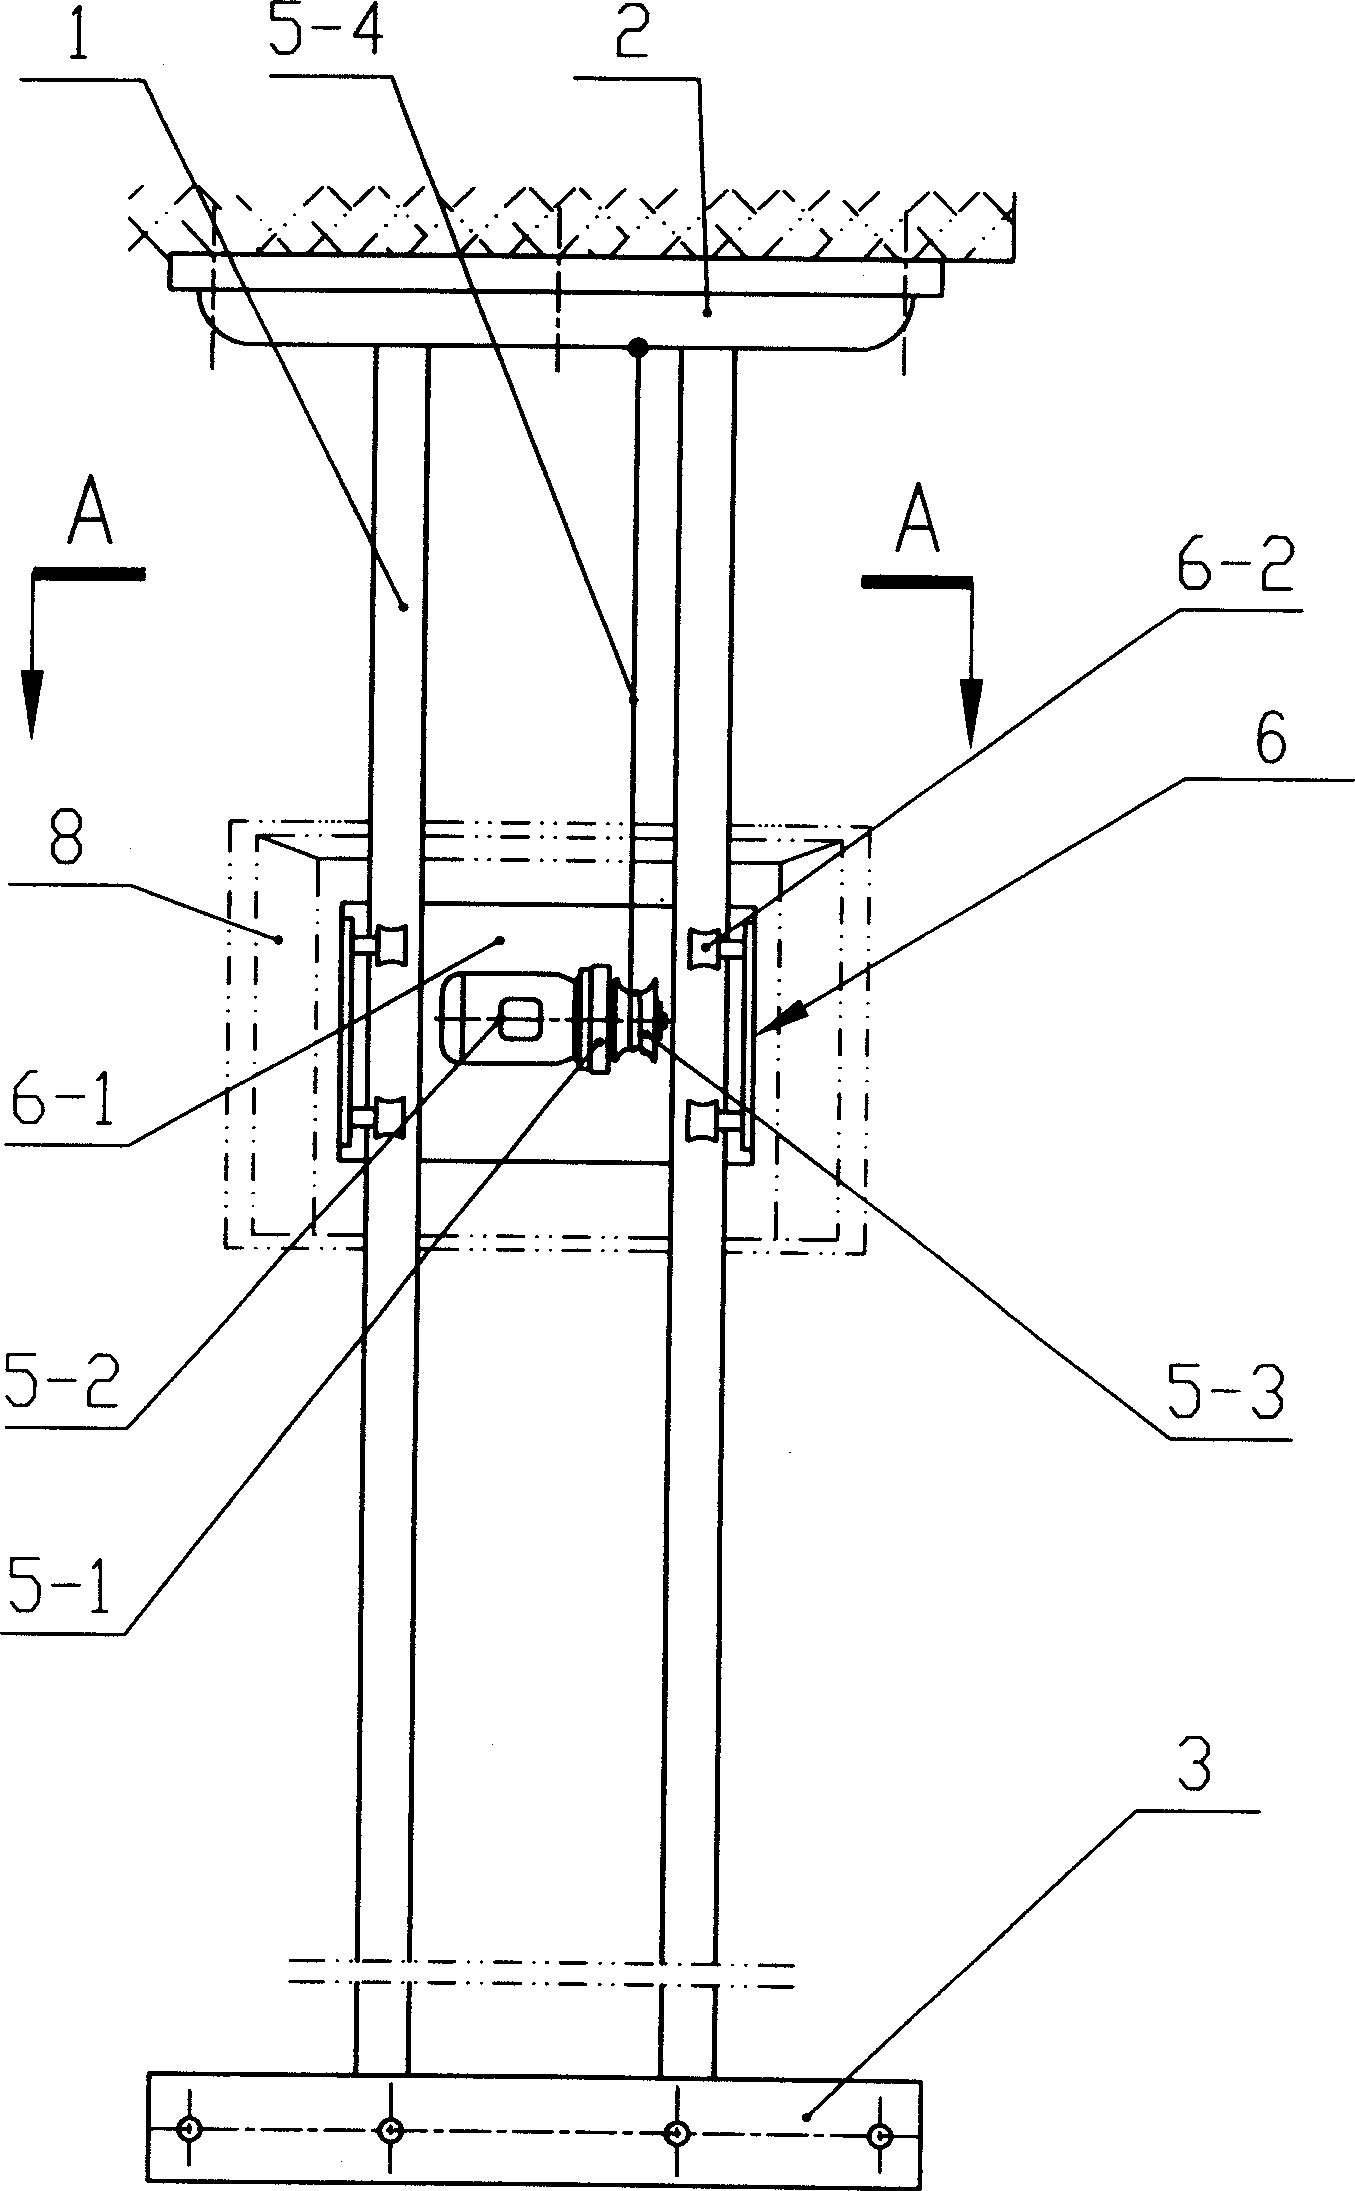 Television receiver lifter